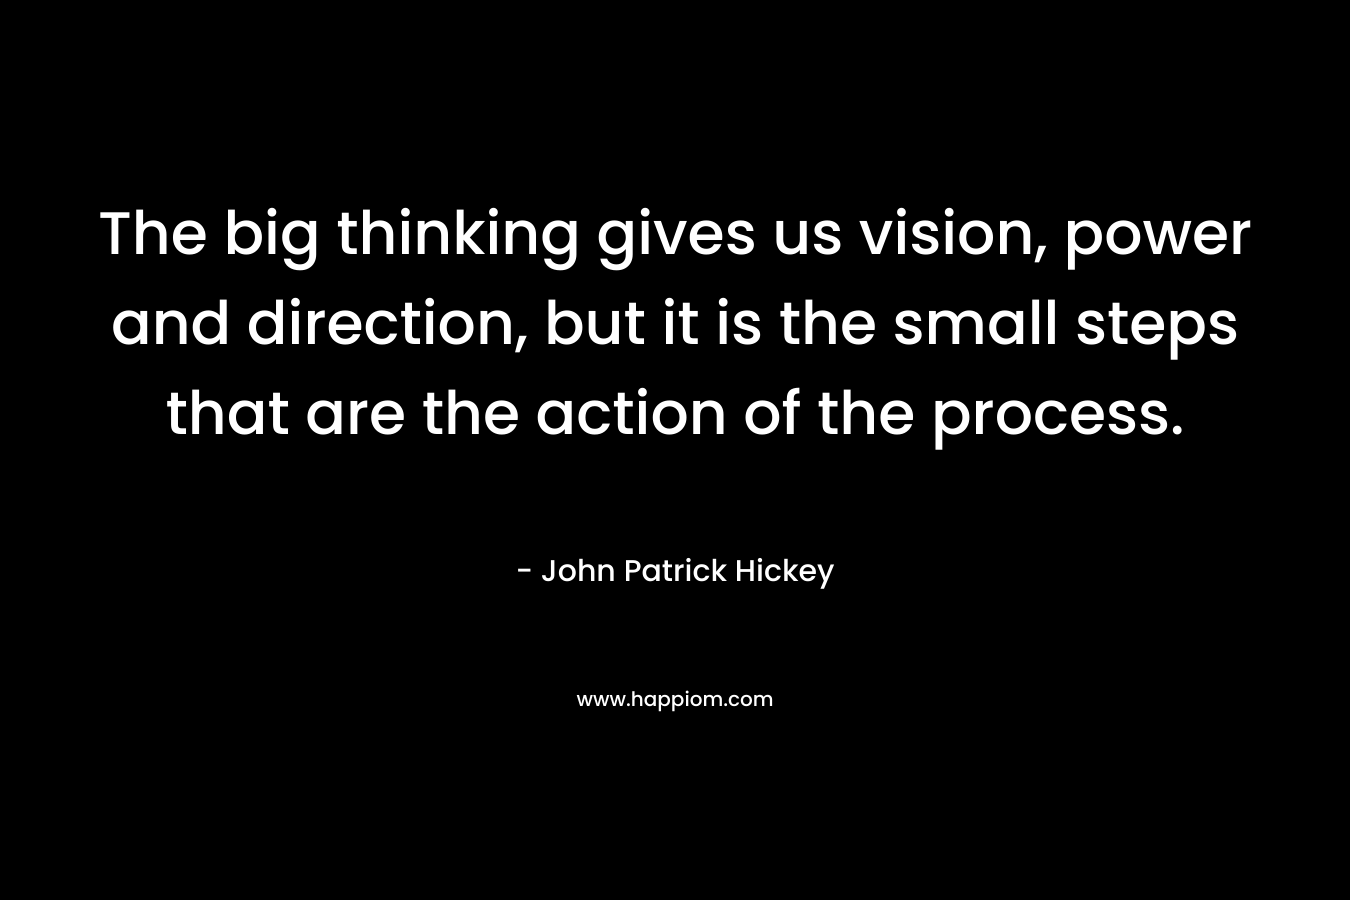 The big thinking gives us vision, power and direction, but it is the small steps that are the action of the process.